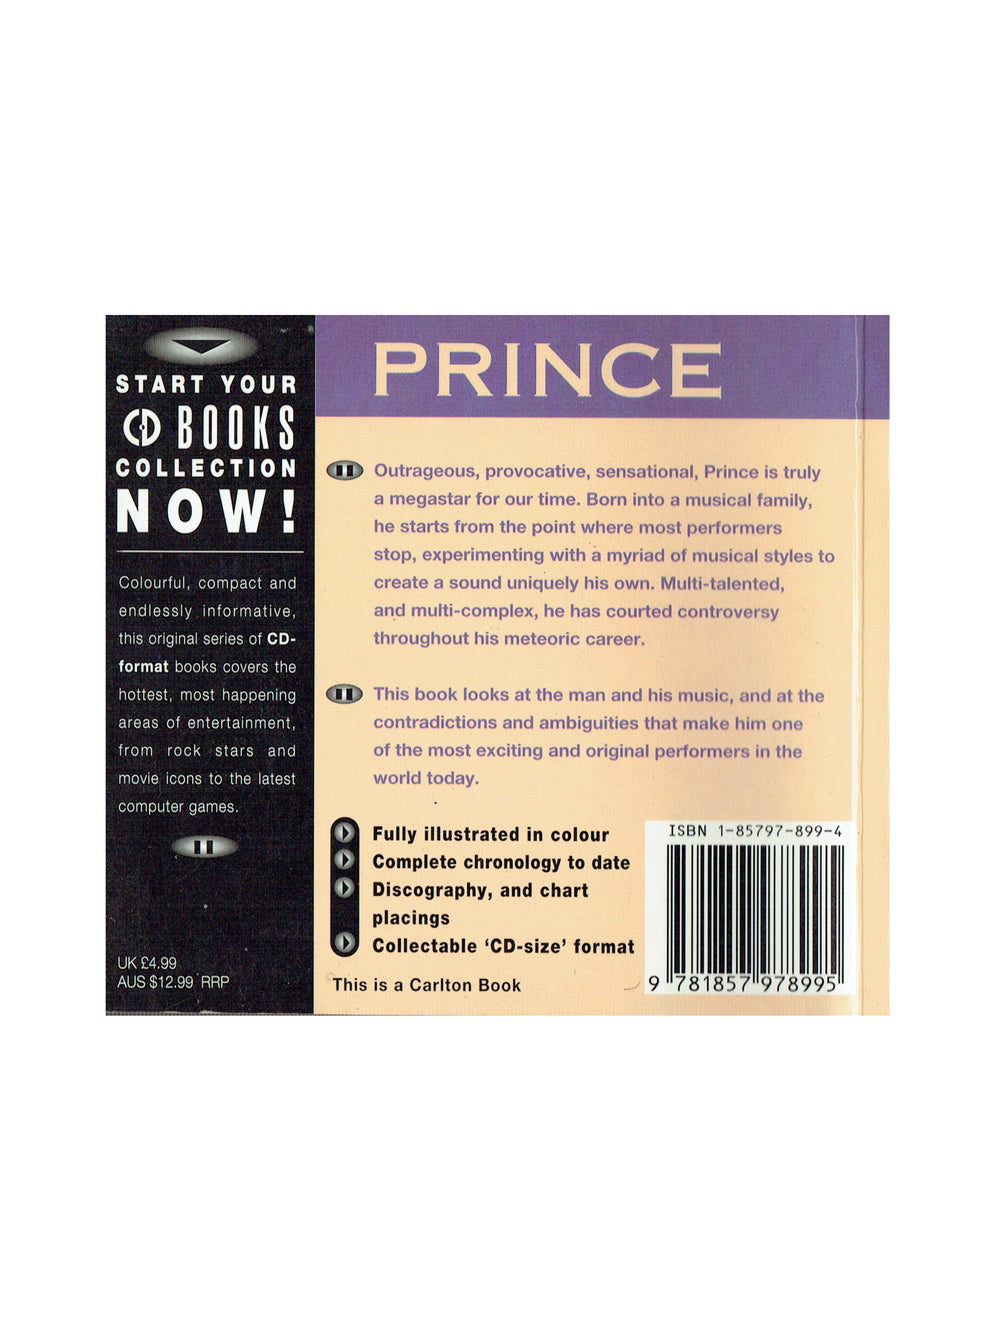 Prince – Interview Disc & Fully Illustrated Prince Little Book CD Format Discography ETC SW